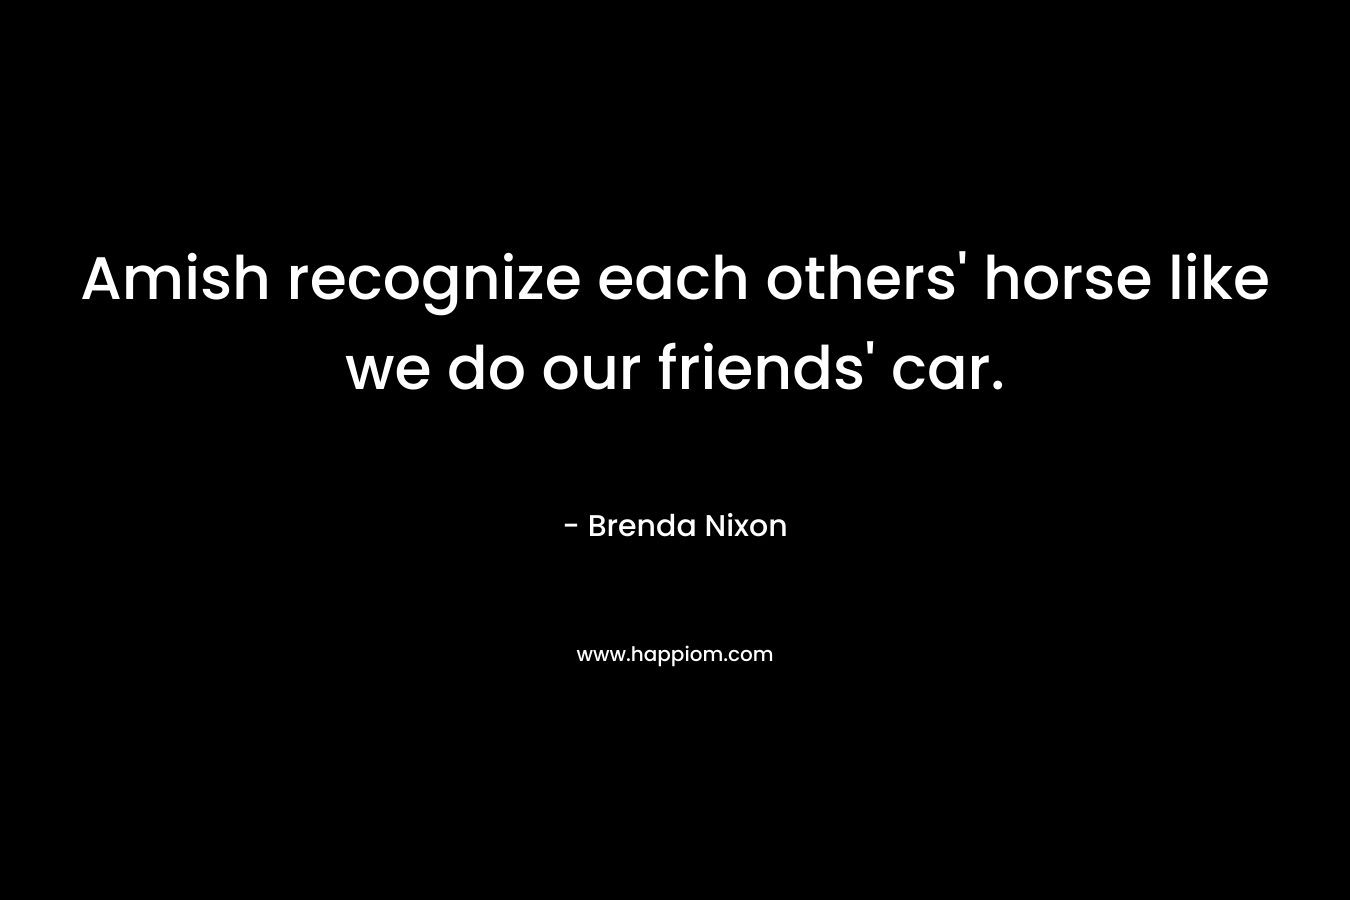 Amish recognize each others’ horse like we do our friends’ car. – Brenda Nixon